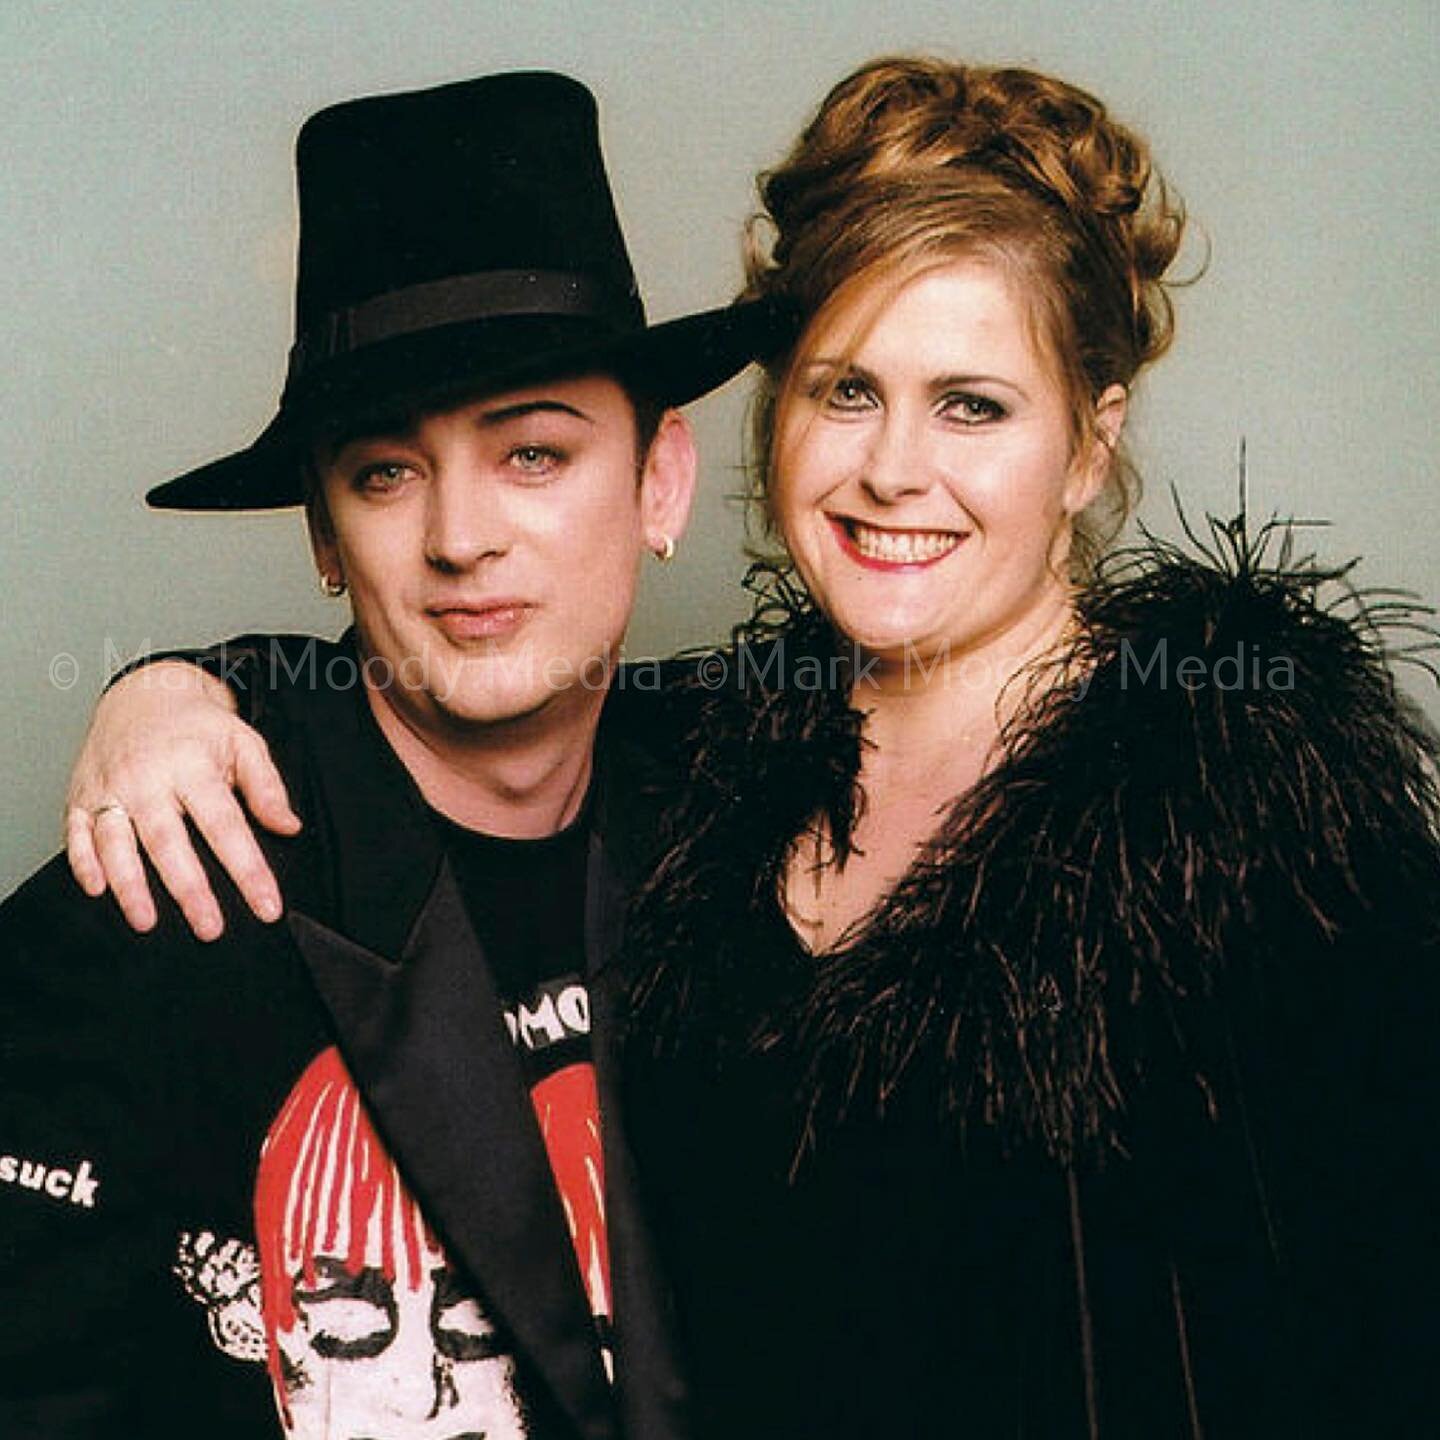 Looking forward to seeing Culture Club (&amp; Banamarama) at the Kenwood House concert on Hampstead Heath in a couple of weeks. In 1999 before most of us started using digital cameras, It was fun to photograph Boy George and Alison Moyet at the Dorch